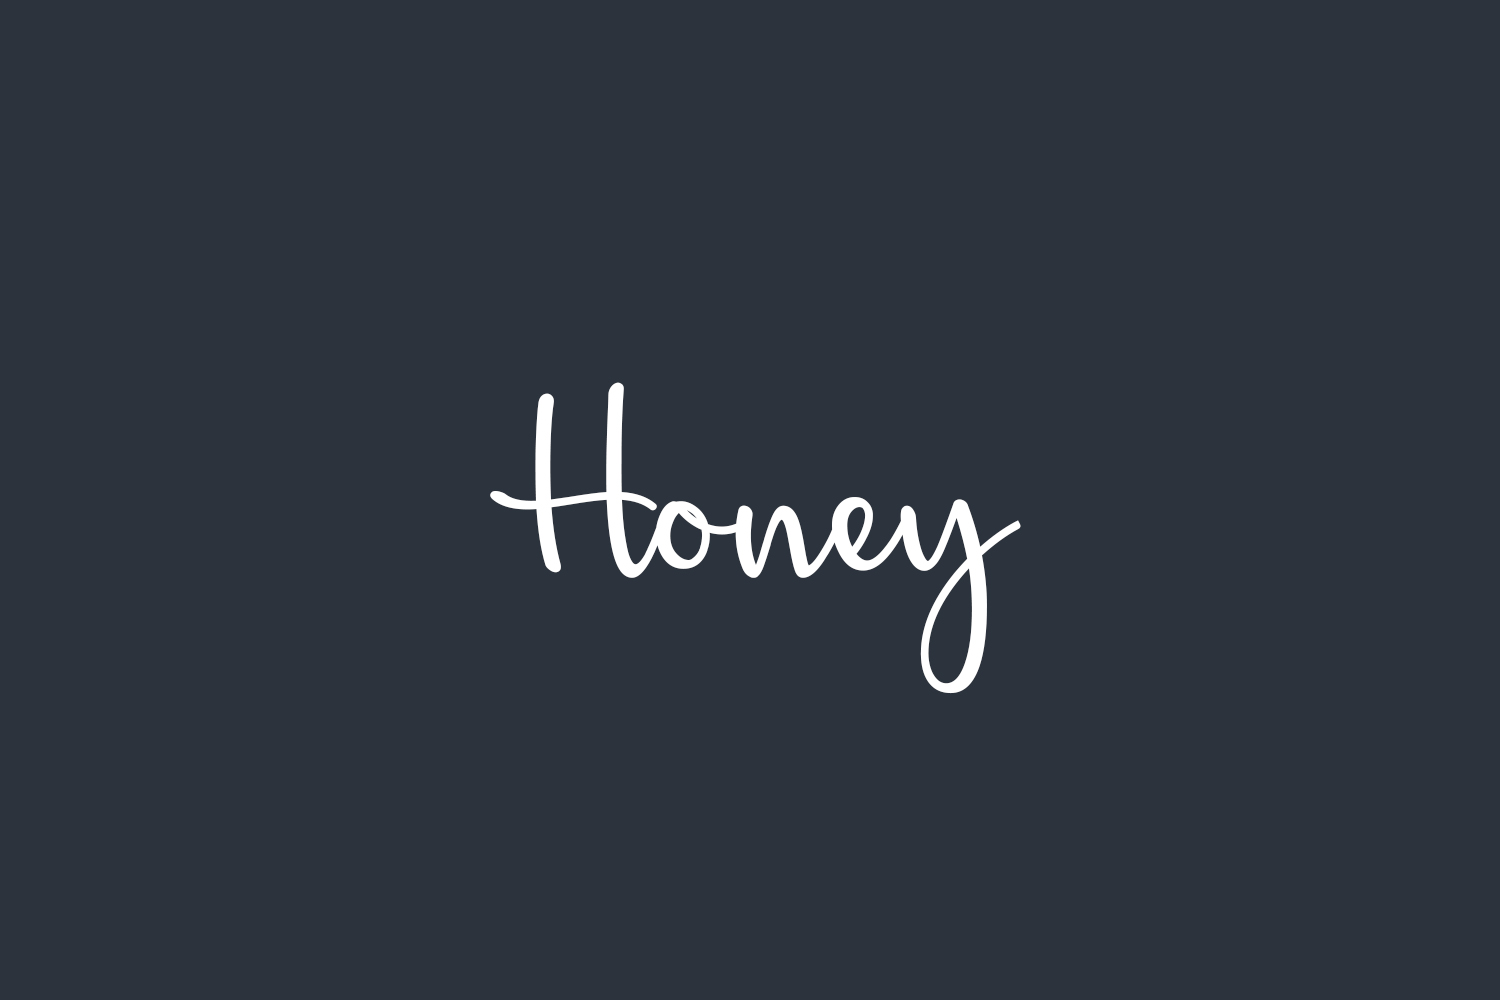 Download Free Honey Fonts Shmonts PSD Mockup Template